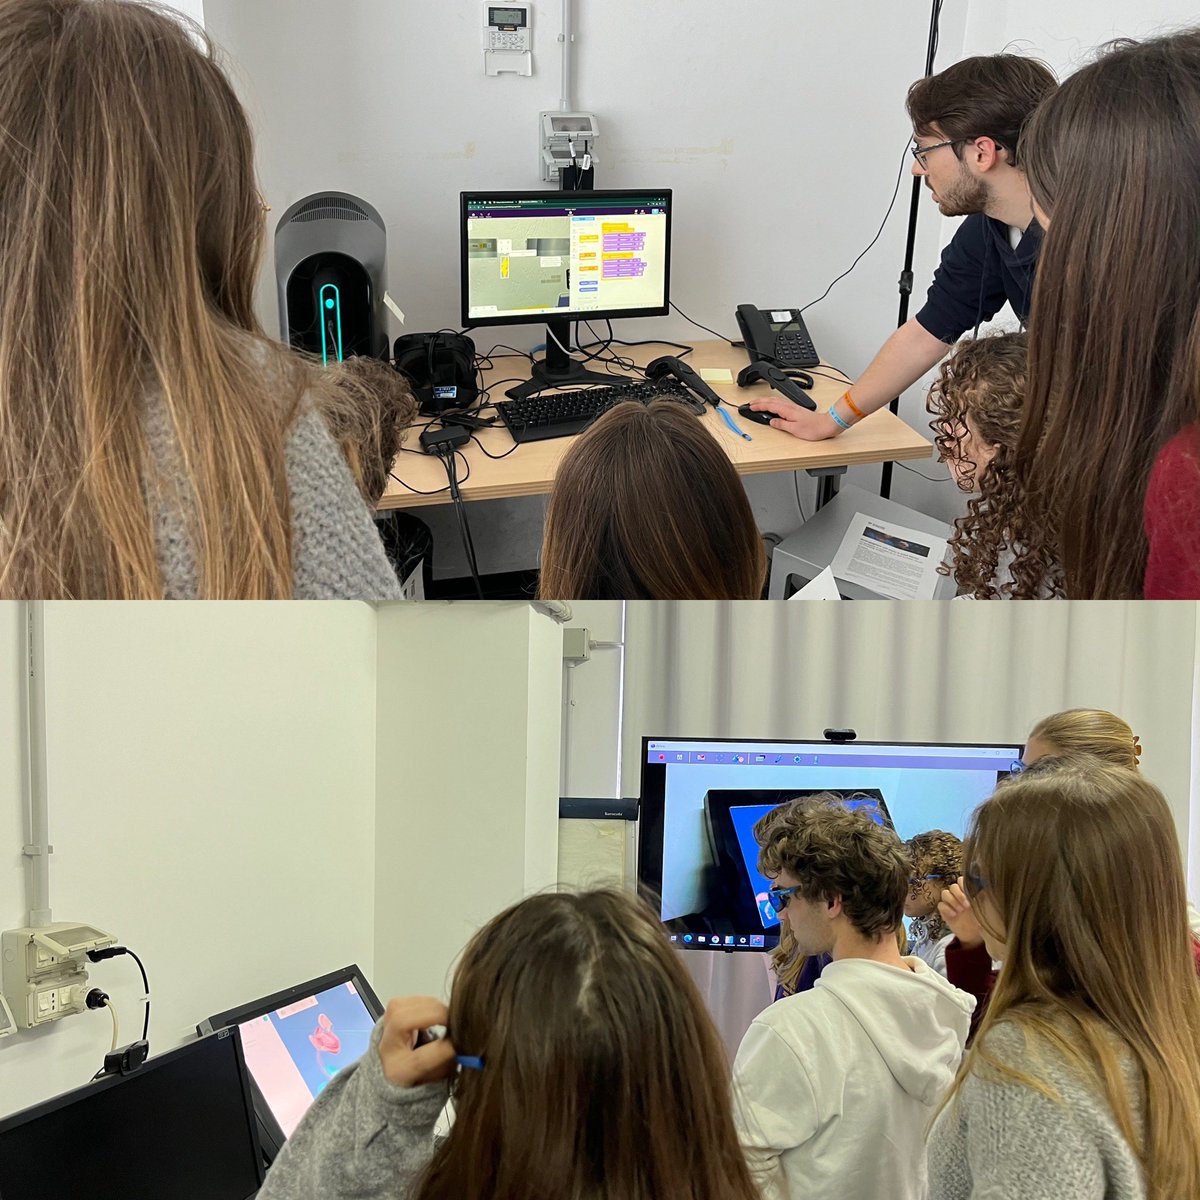 One of the things that I like the most about my job is showing our lab to #HighSchool and #Bachelor #students who can know more about #MedicalTraining #AdvancedSimulation #HealthcareSimulation and the role of #bioengineers!